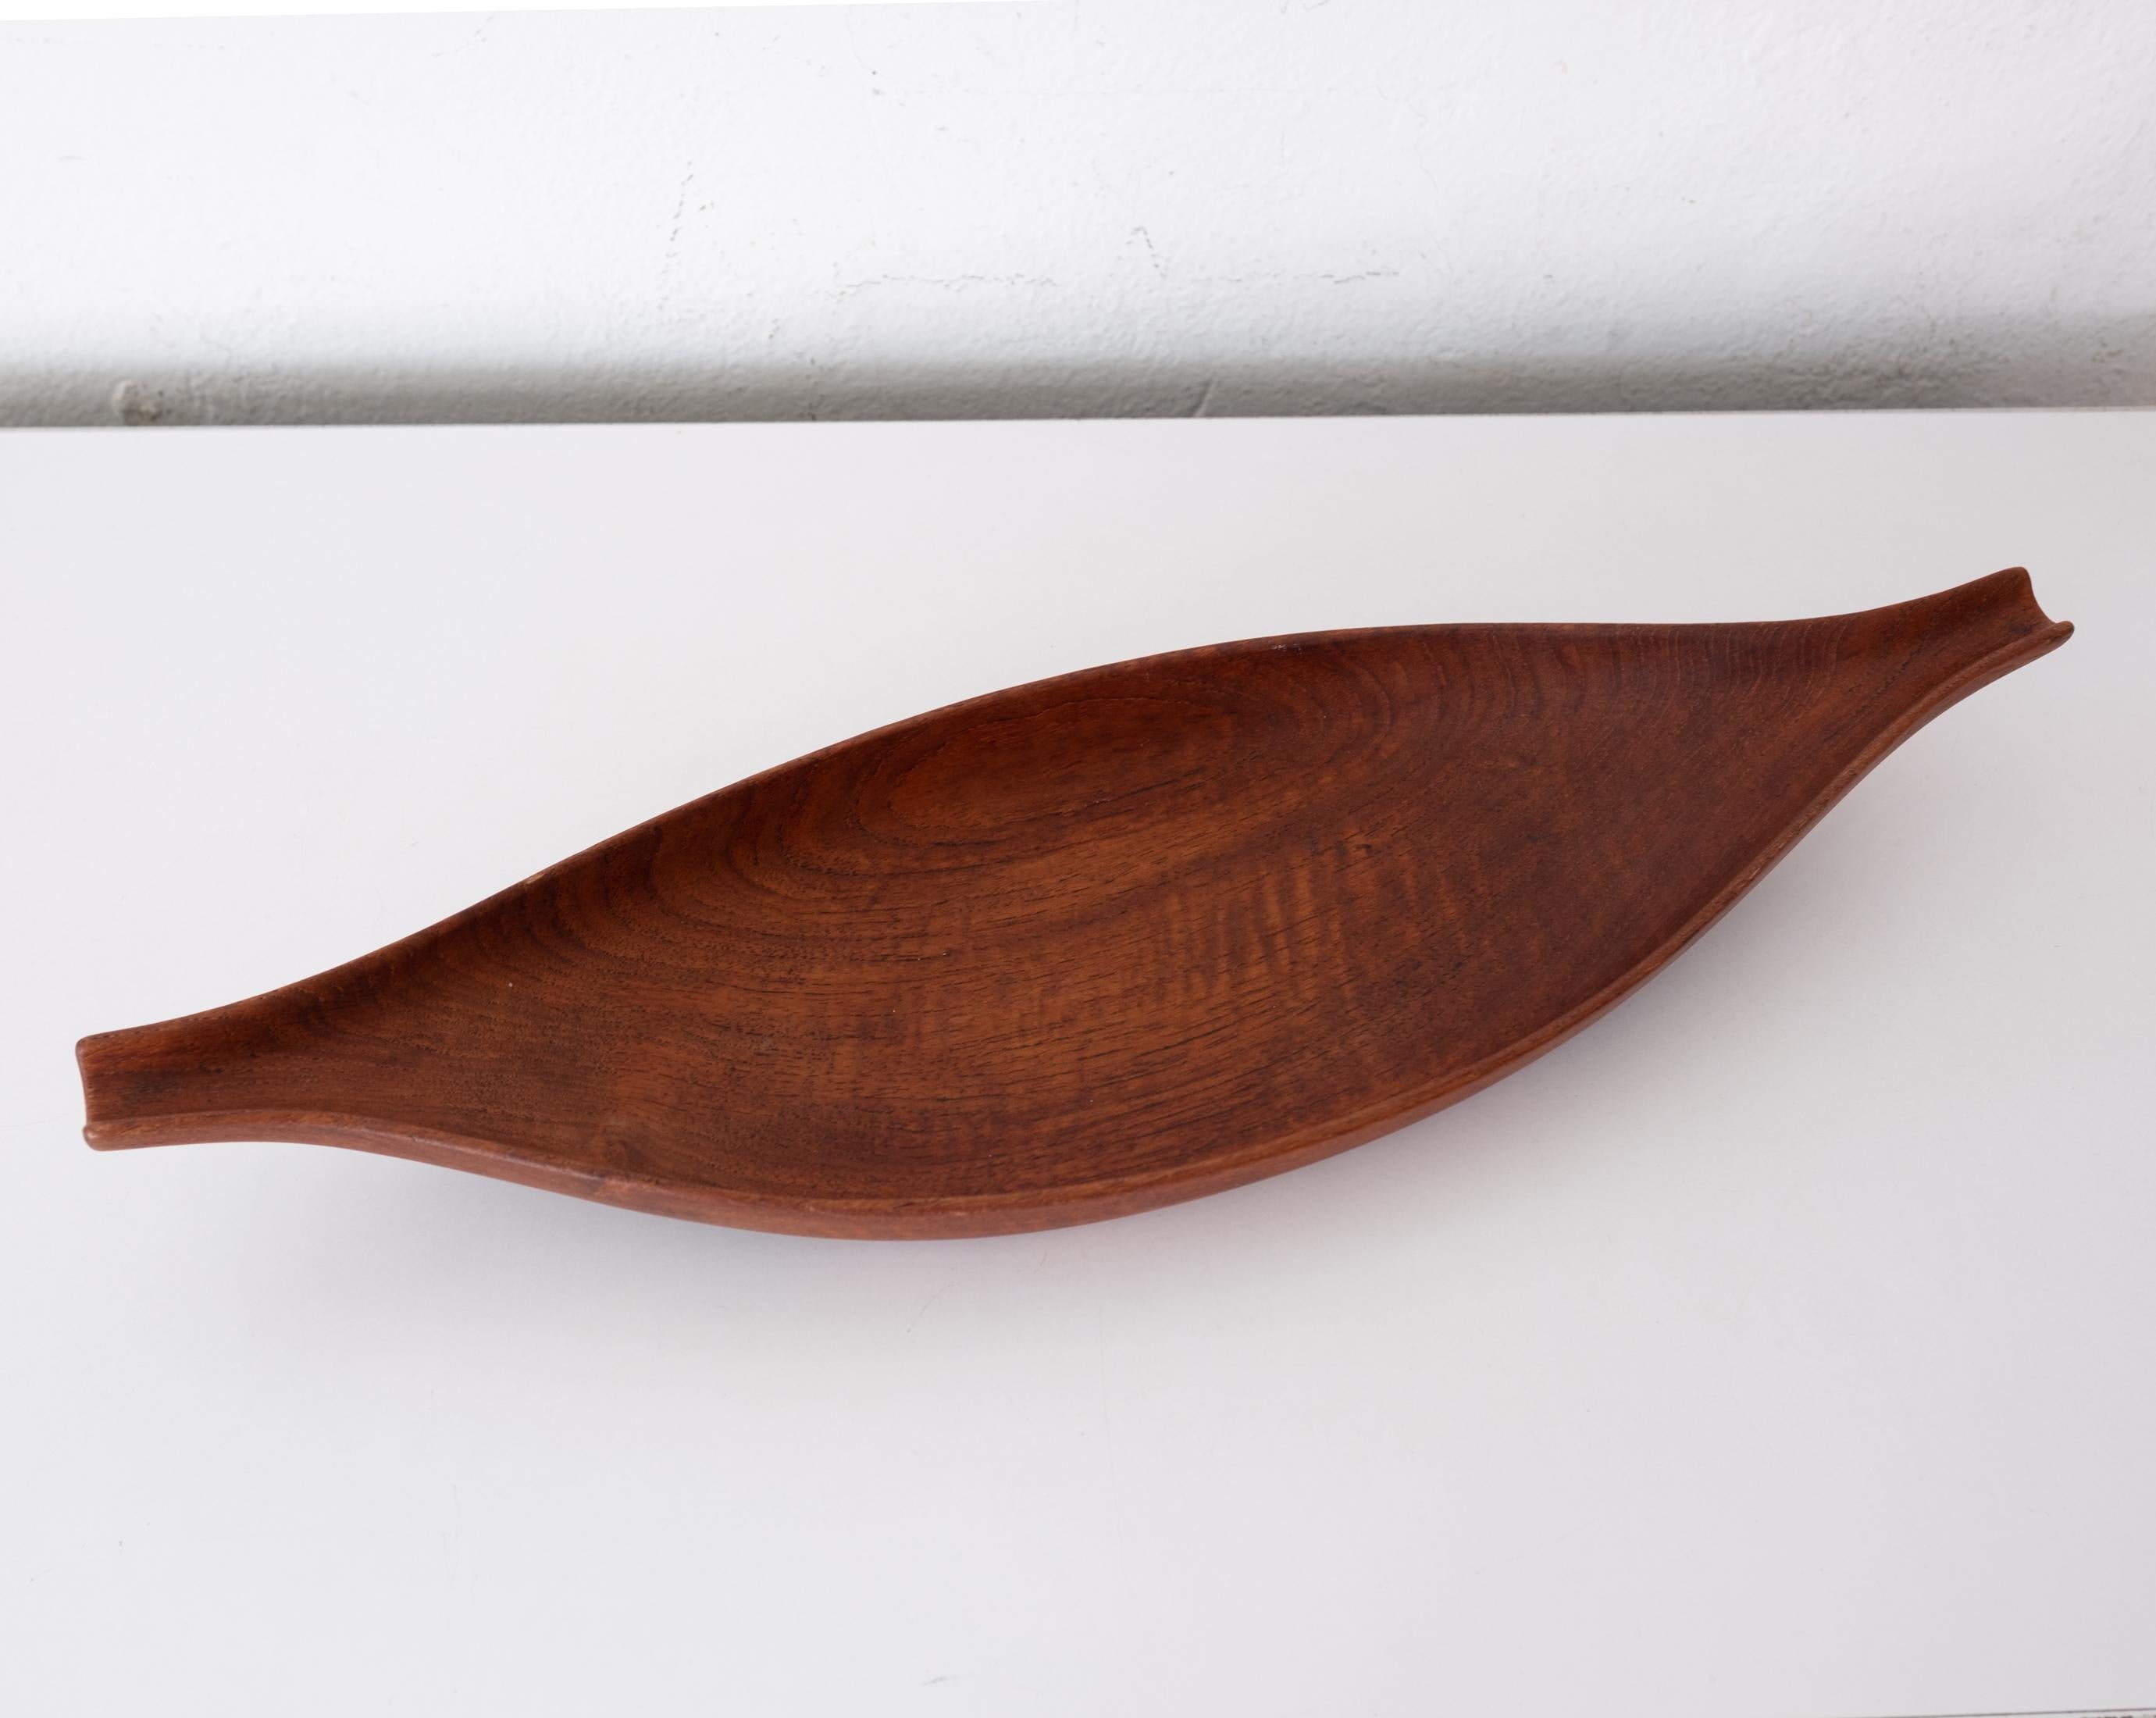 Sculptural Midcentury Italian Wood Fruit Bowl or Catch All by Anri, 1950s For Sale 6